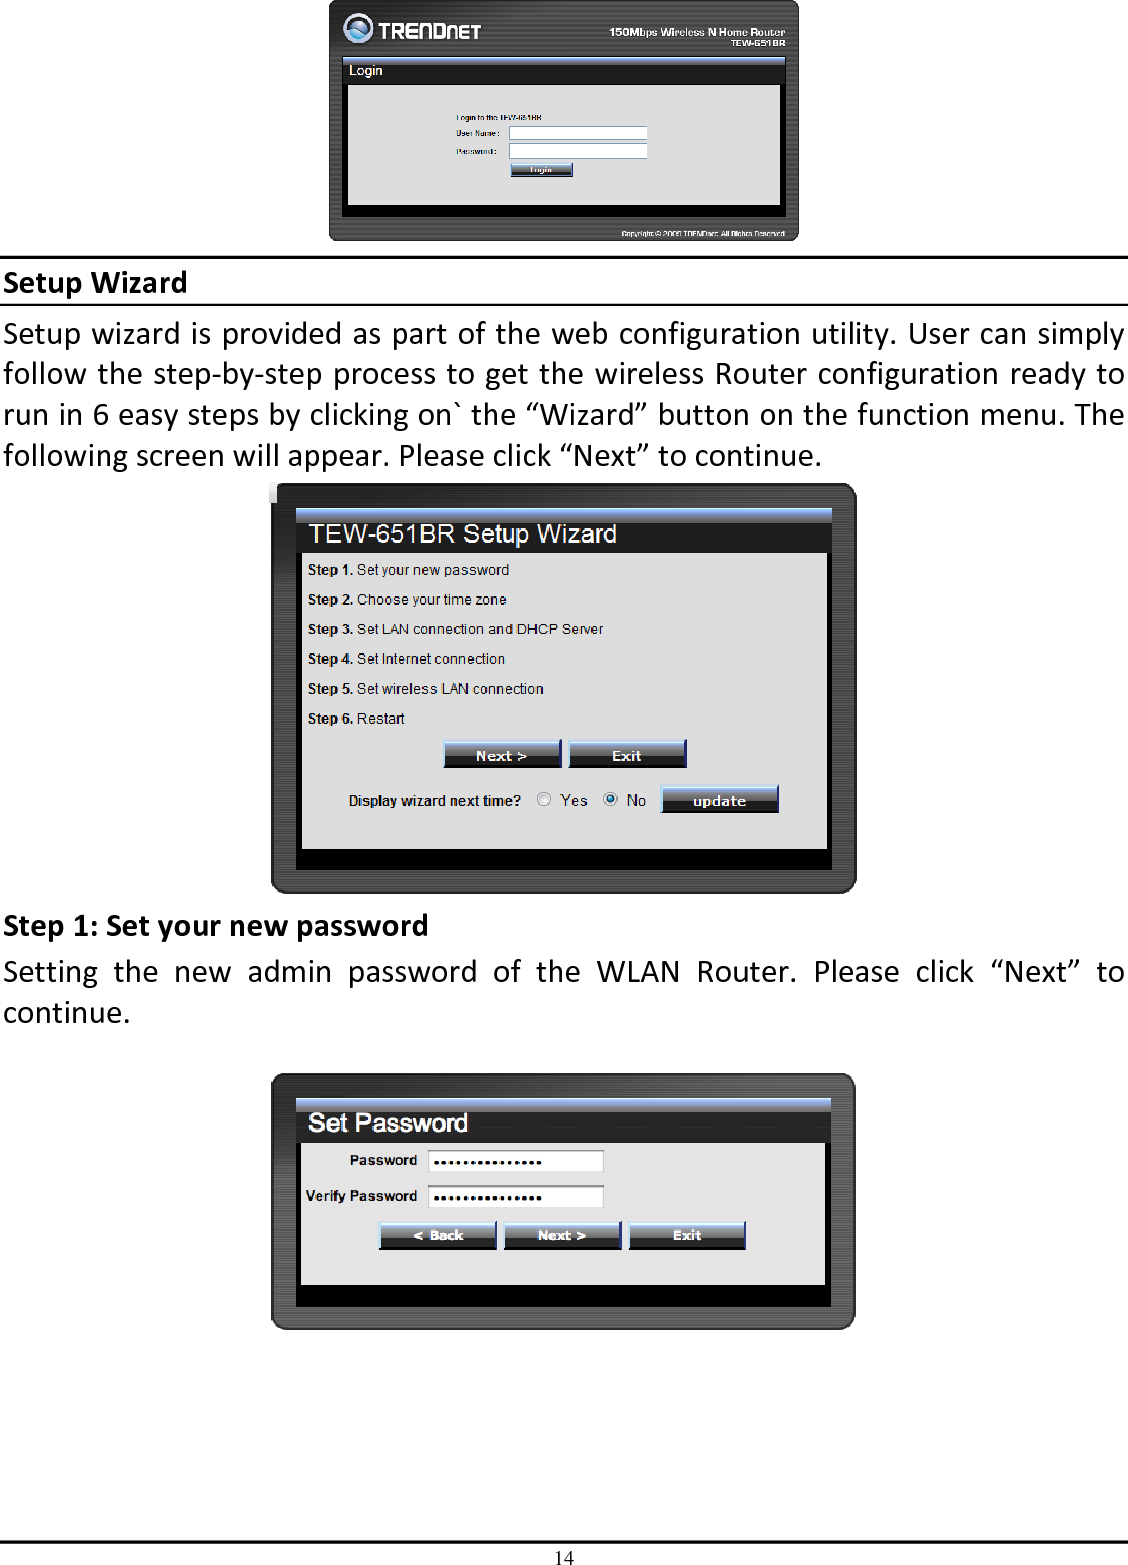 14  Setup Wizard Setup wizard is provided as part of the web configuration utility. User can simply follow the step-by-step process to get the wireless Router configuration ready to run in 6 easy steps by clicking on` the “Wizard” button on the function menu. The following screen will appear. Please click “Next” to continue.  Step 1: Set your new password Setting  the  new  admin  password  of  the  WLAN  Router.  Please  click  “Next”  to continue.        